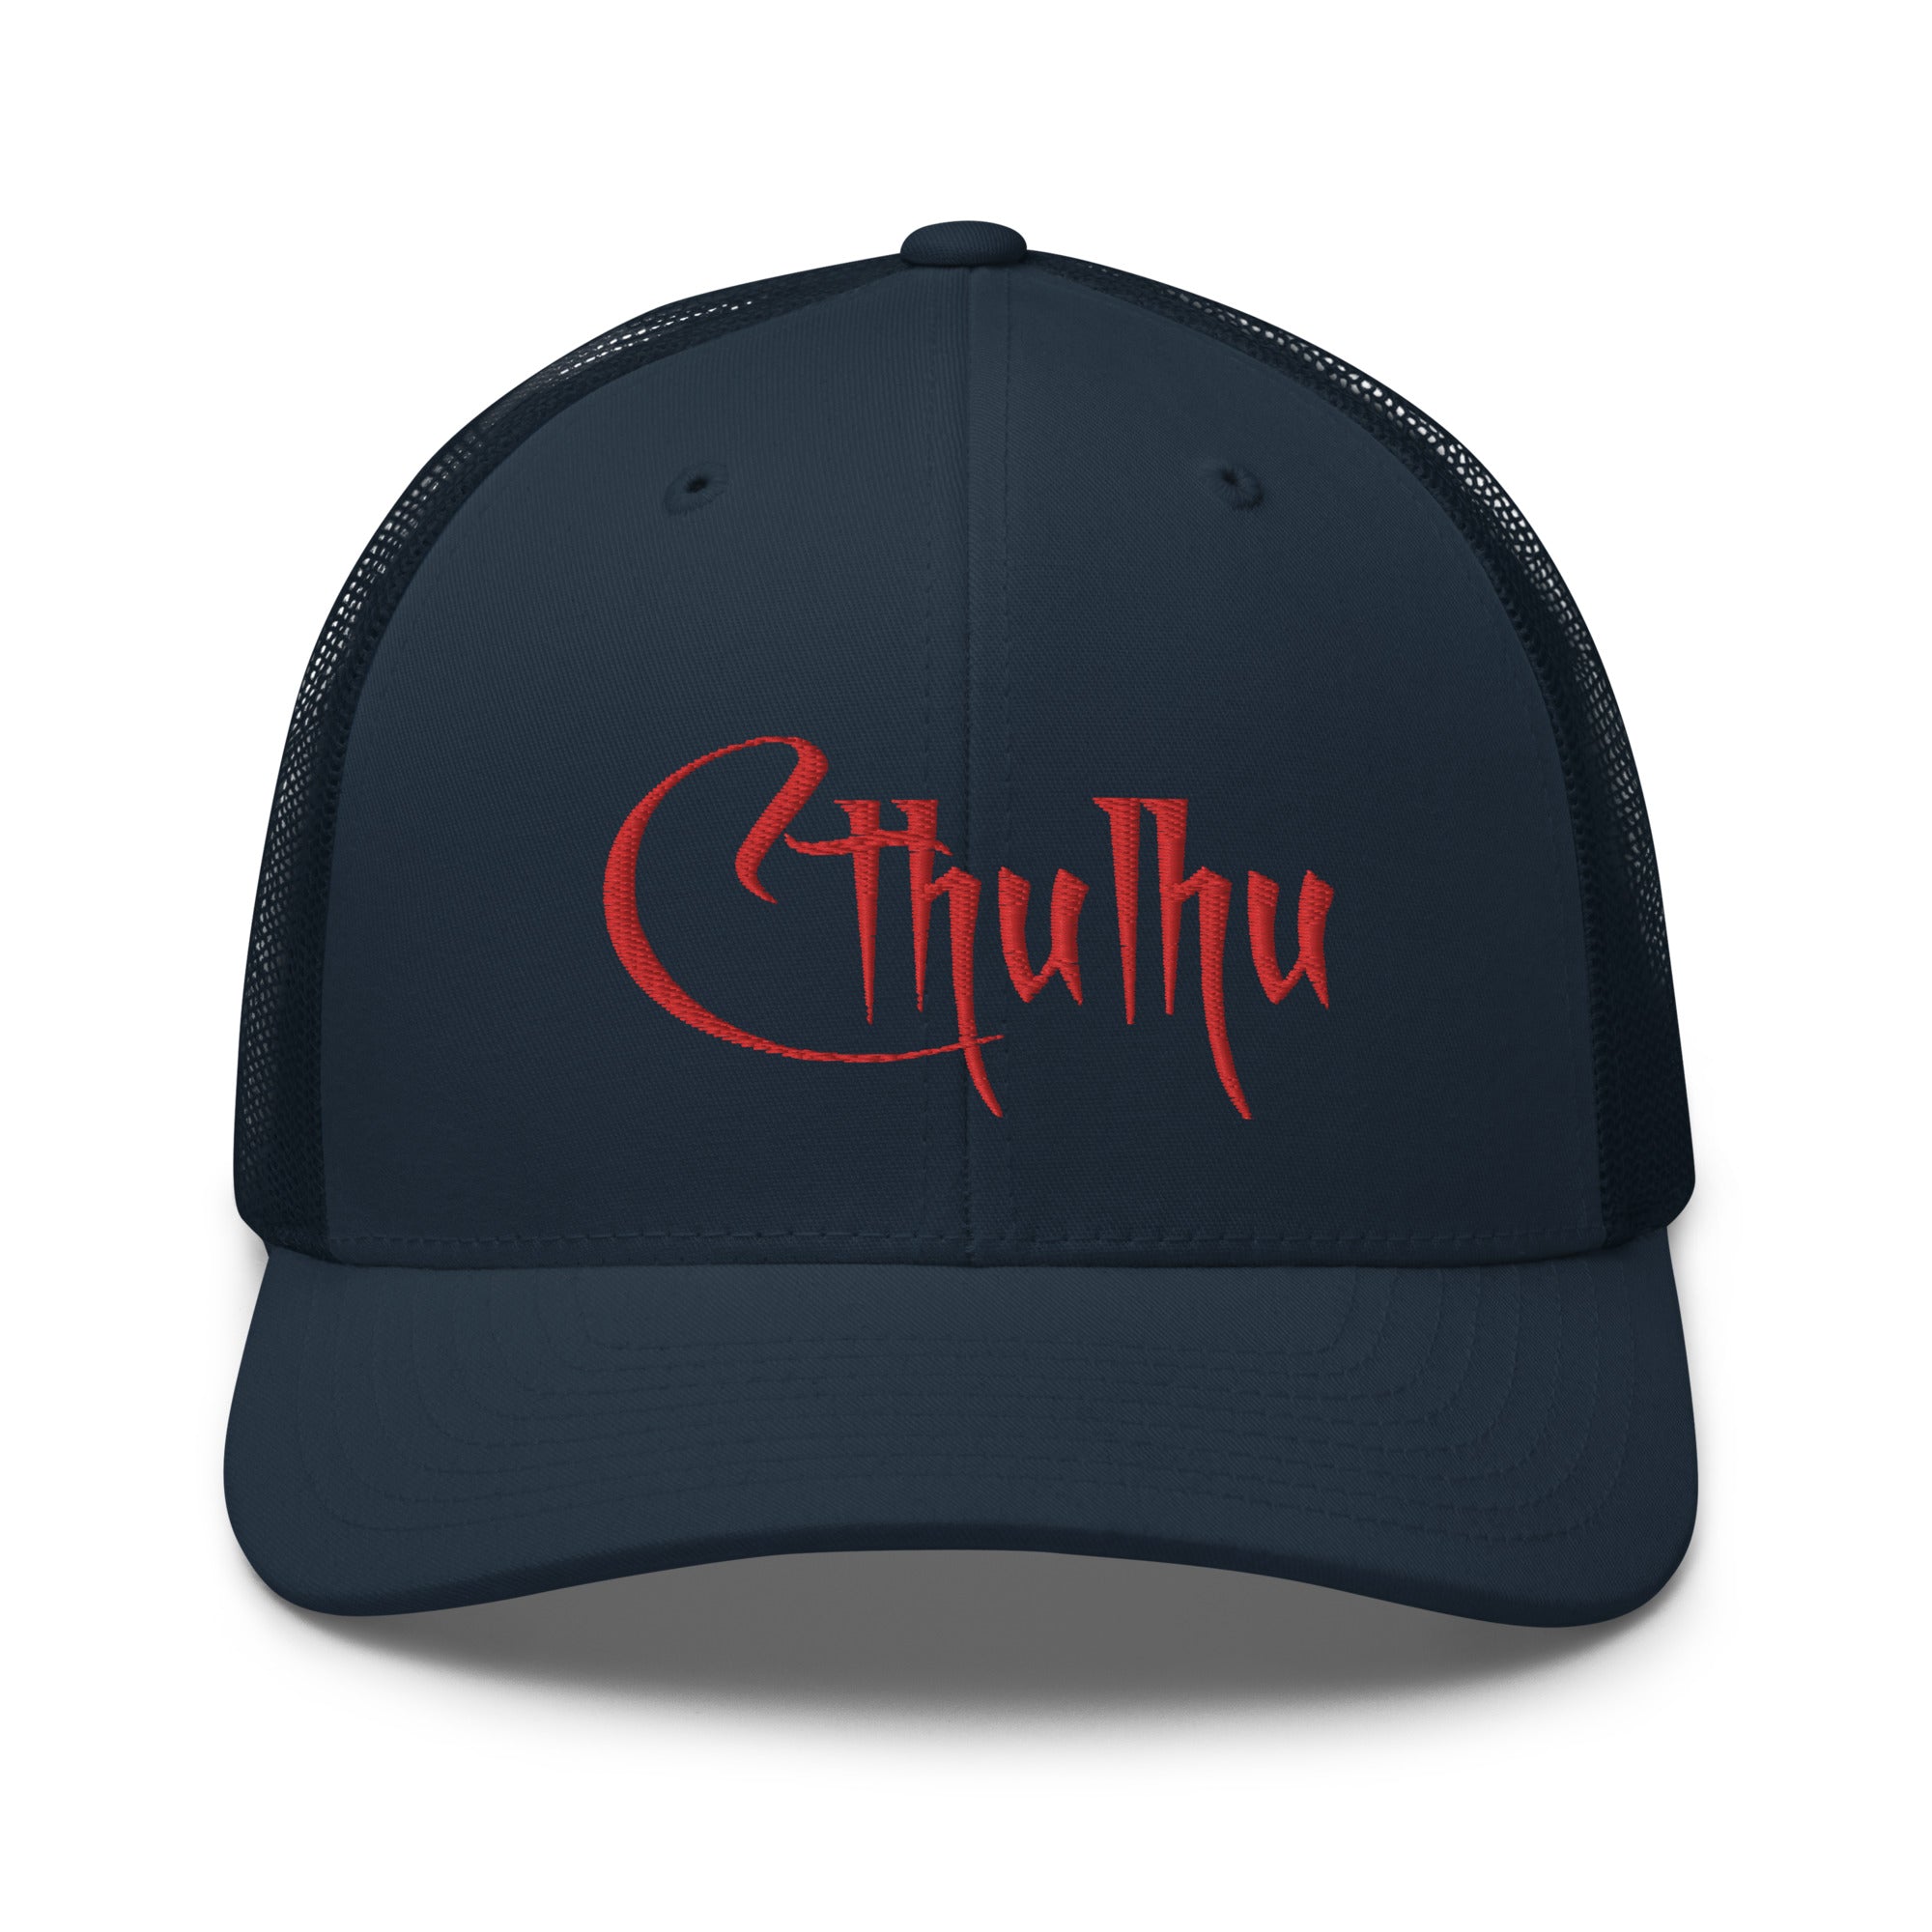 Red Call of Cthulhu Great Old Ones Embroidered Trucker Cap Snapback Hat